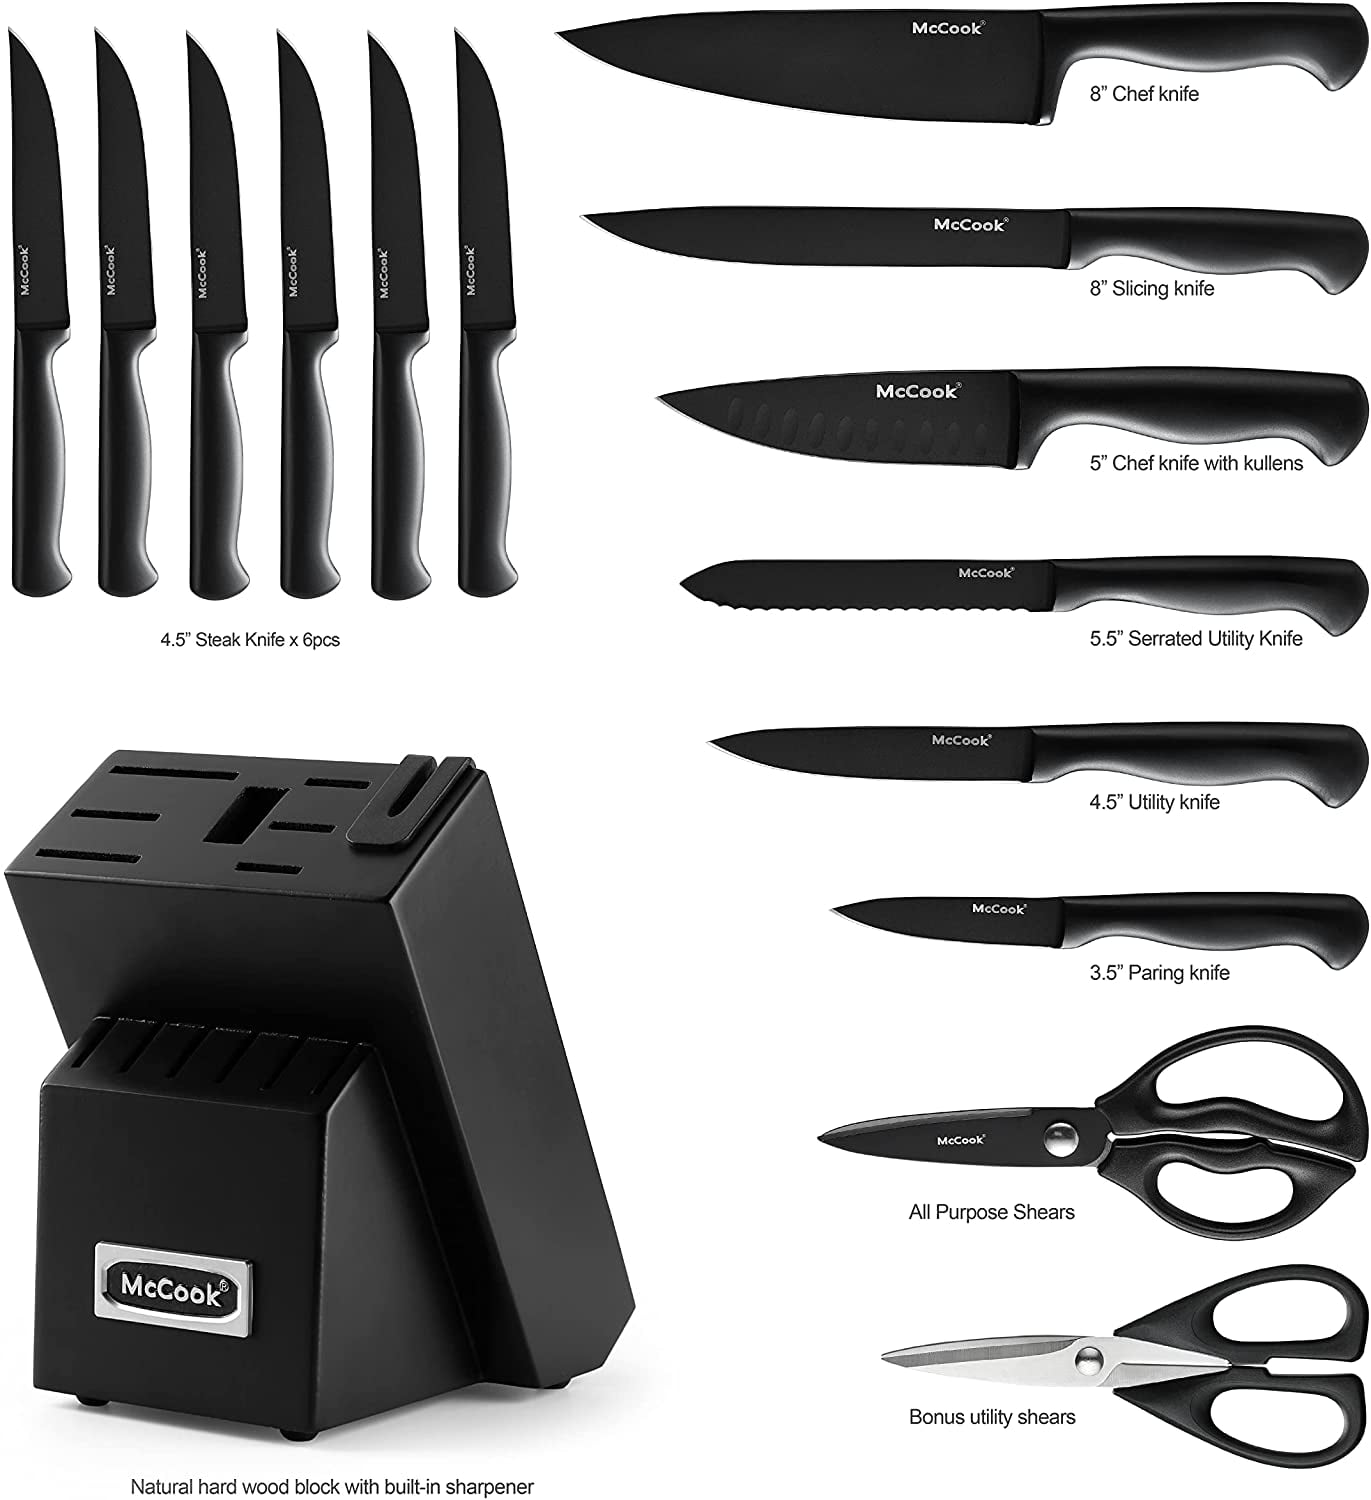 Best Deal for McCook® MC21GB Knife Sets + MCW11 Bamboo Cutting Boards Set